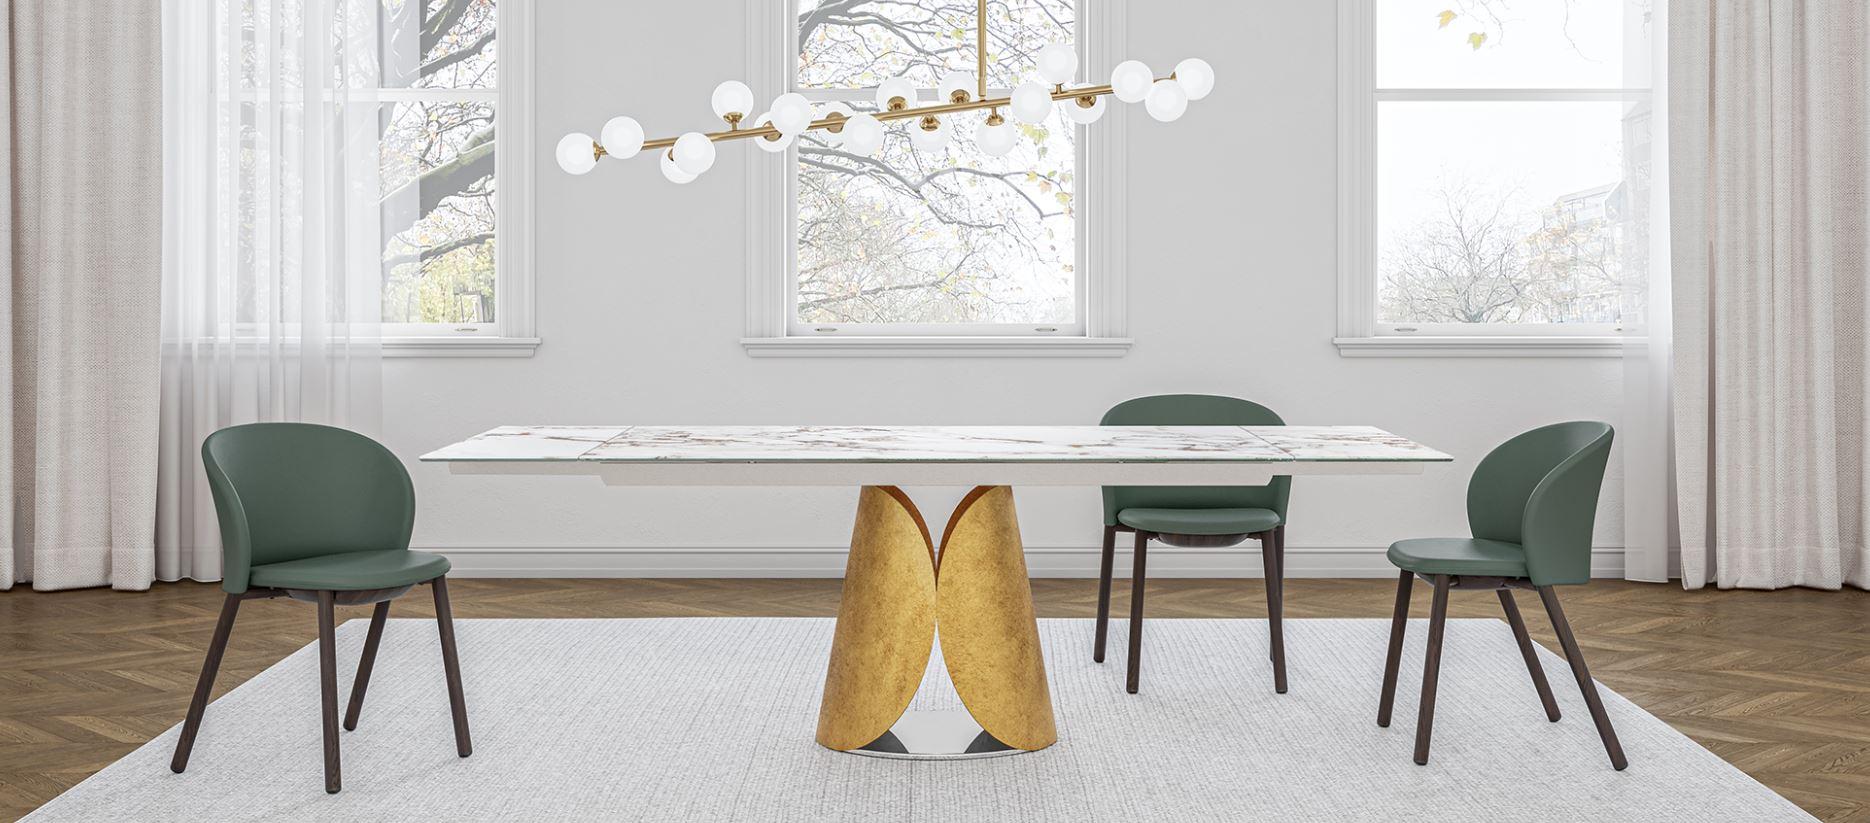 Estia Allungabile Dining Table by Chinellato Design
Dimensions: W 200 x D 100 x H 81 cm
Extendable: + 40 / + 40 cm
Materials:
Top: Glossy Ceramic Capraia, Extra Clear Tempered Glass.
Base: Black Patinated Gold.

Rectangular dining table available in